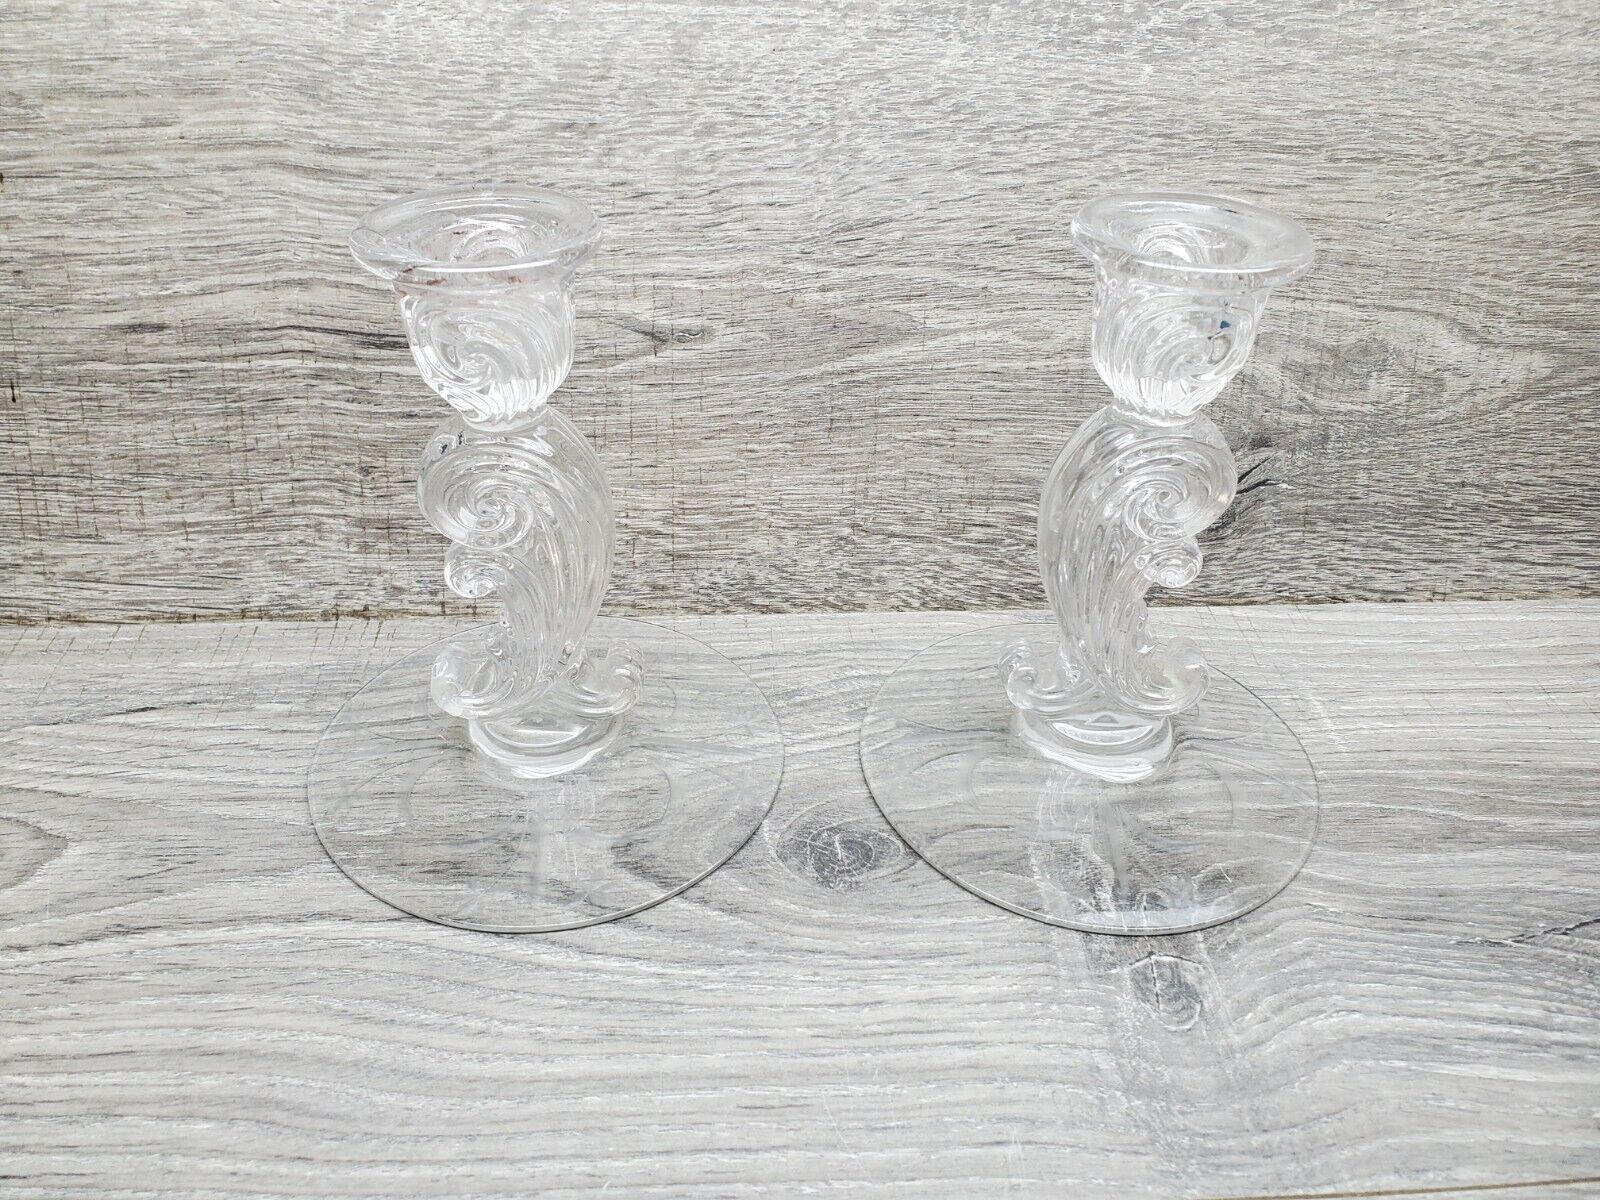 Pair of Vintage Etched  Glass Candle Holders